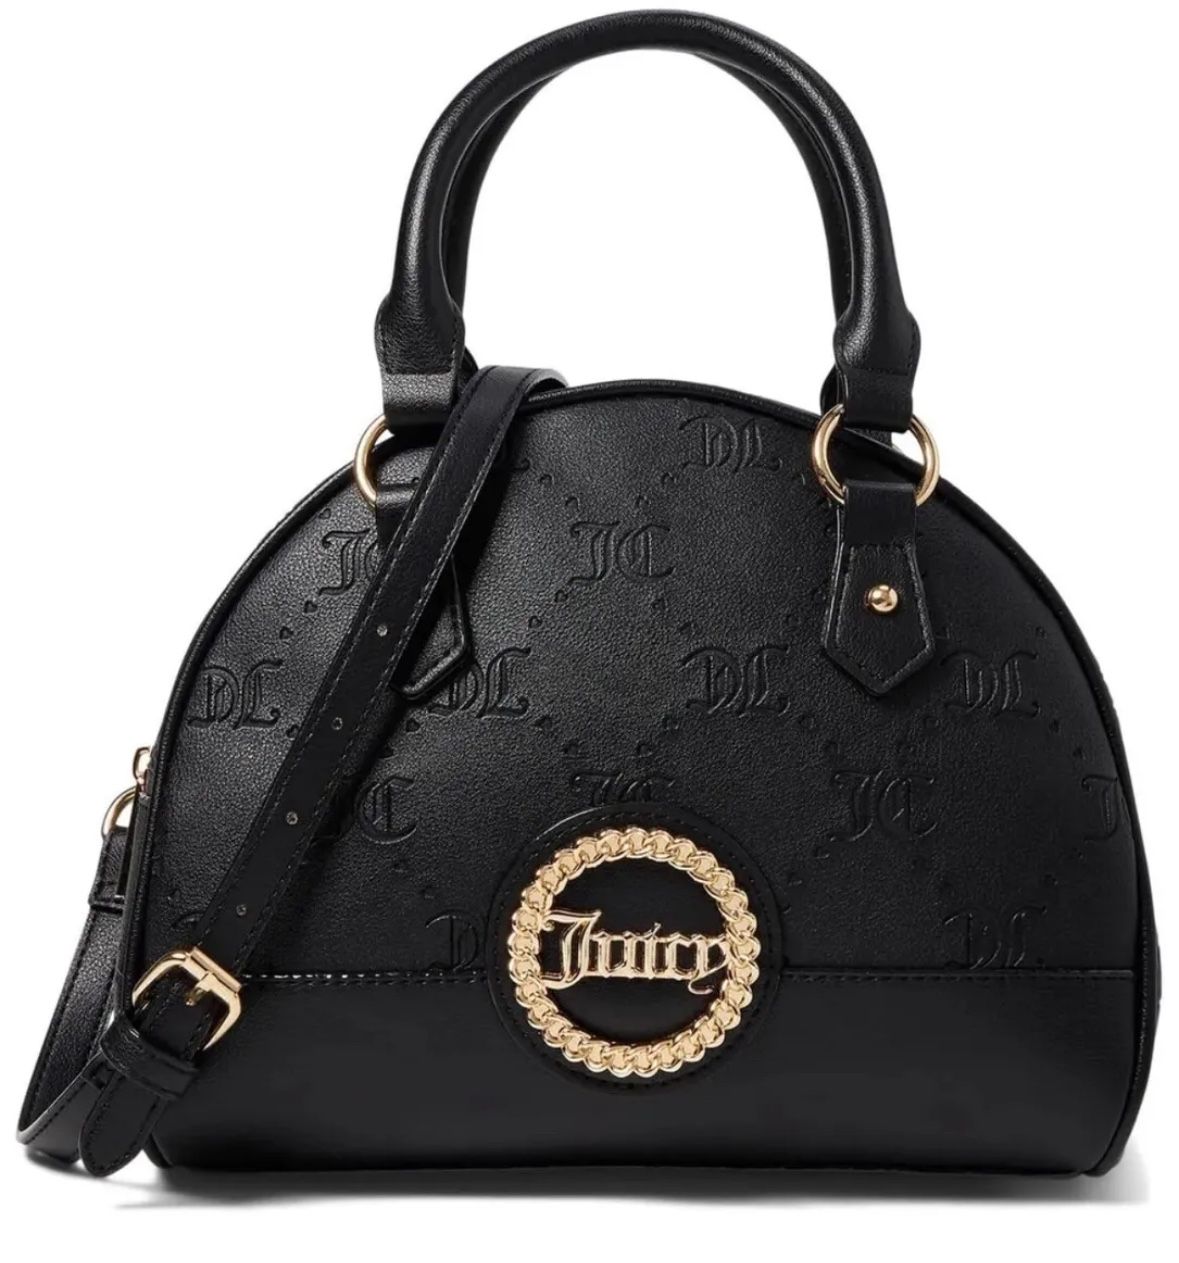 Juicy Couture stay In circle bowler